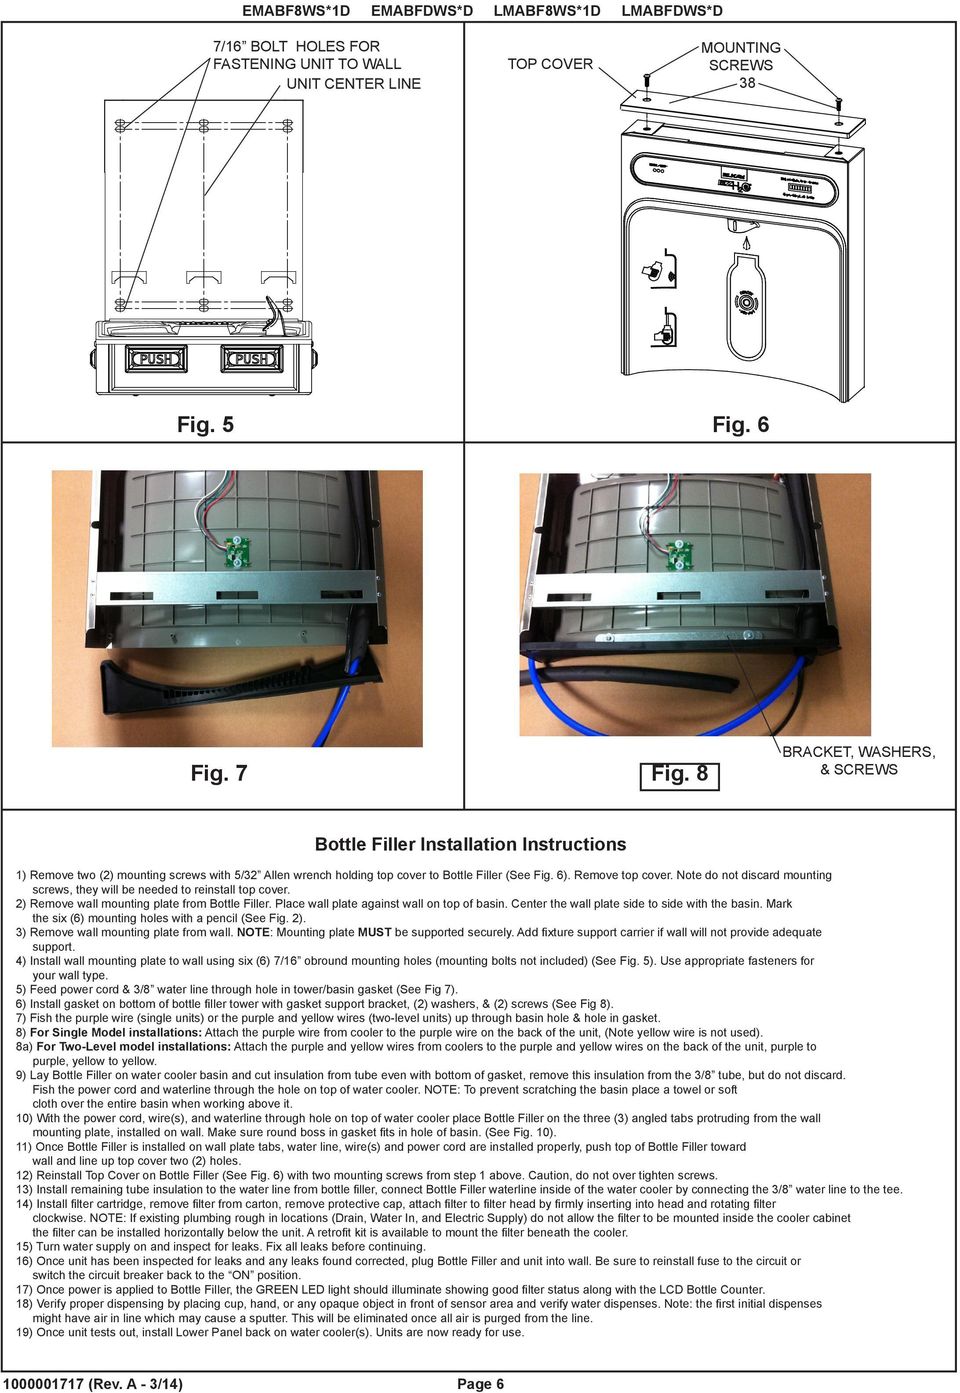 Note do not discard mounting screws, they will be needed to reinstall top cover. ) Remove wall mounting plate from Bottle Filler. Place wall plate against wall on top of basin.